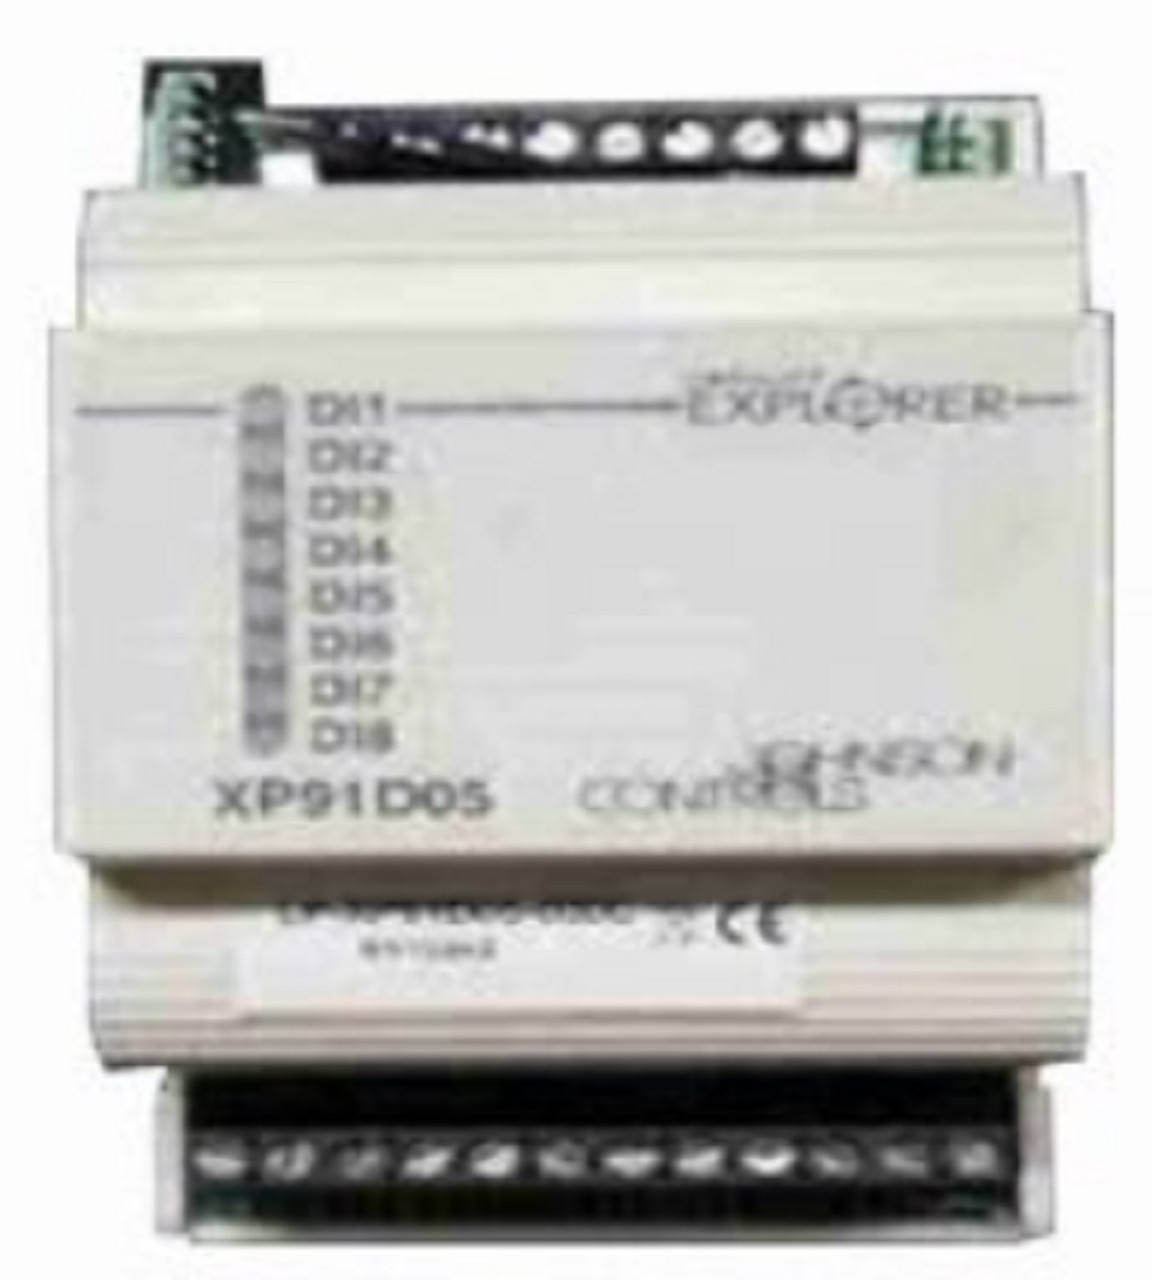 Johnson Controls LP-XP91D05-000C Expansion Board Module for MD20 Master Display [New]